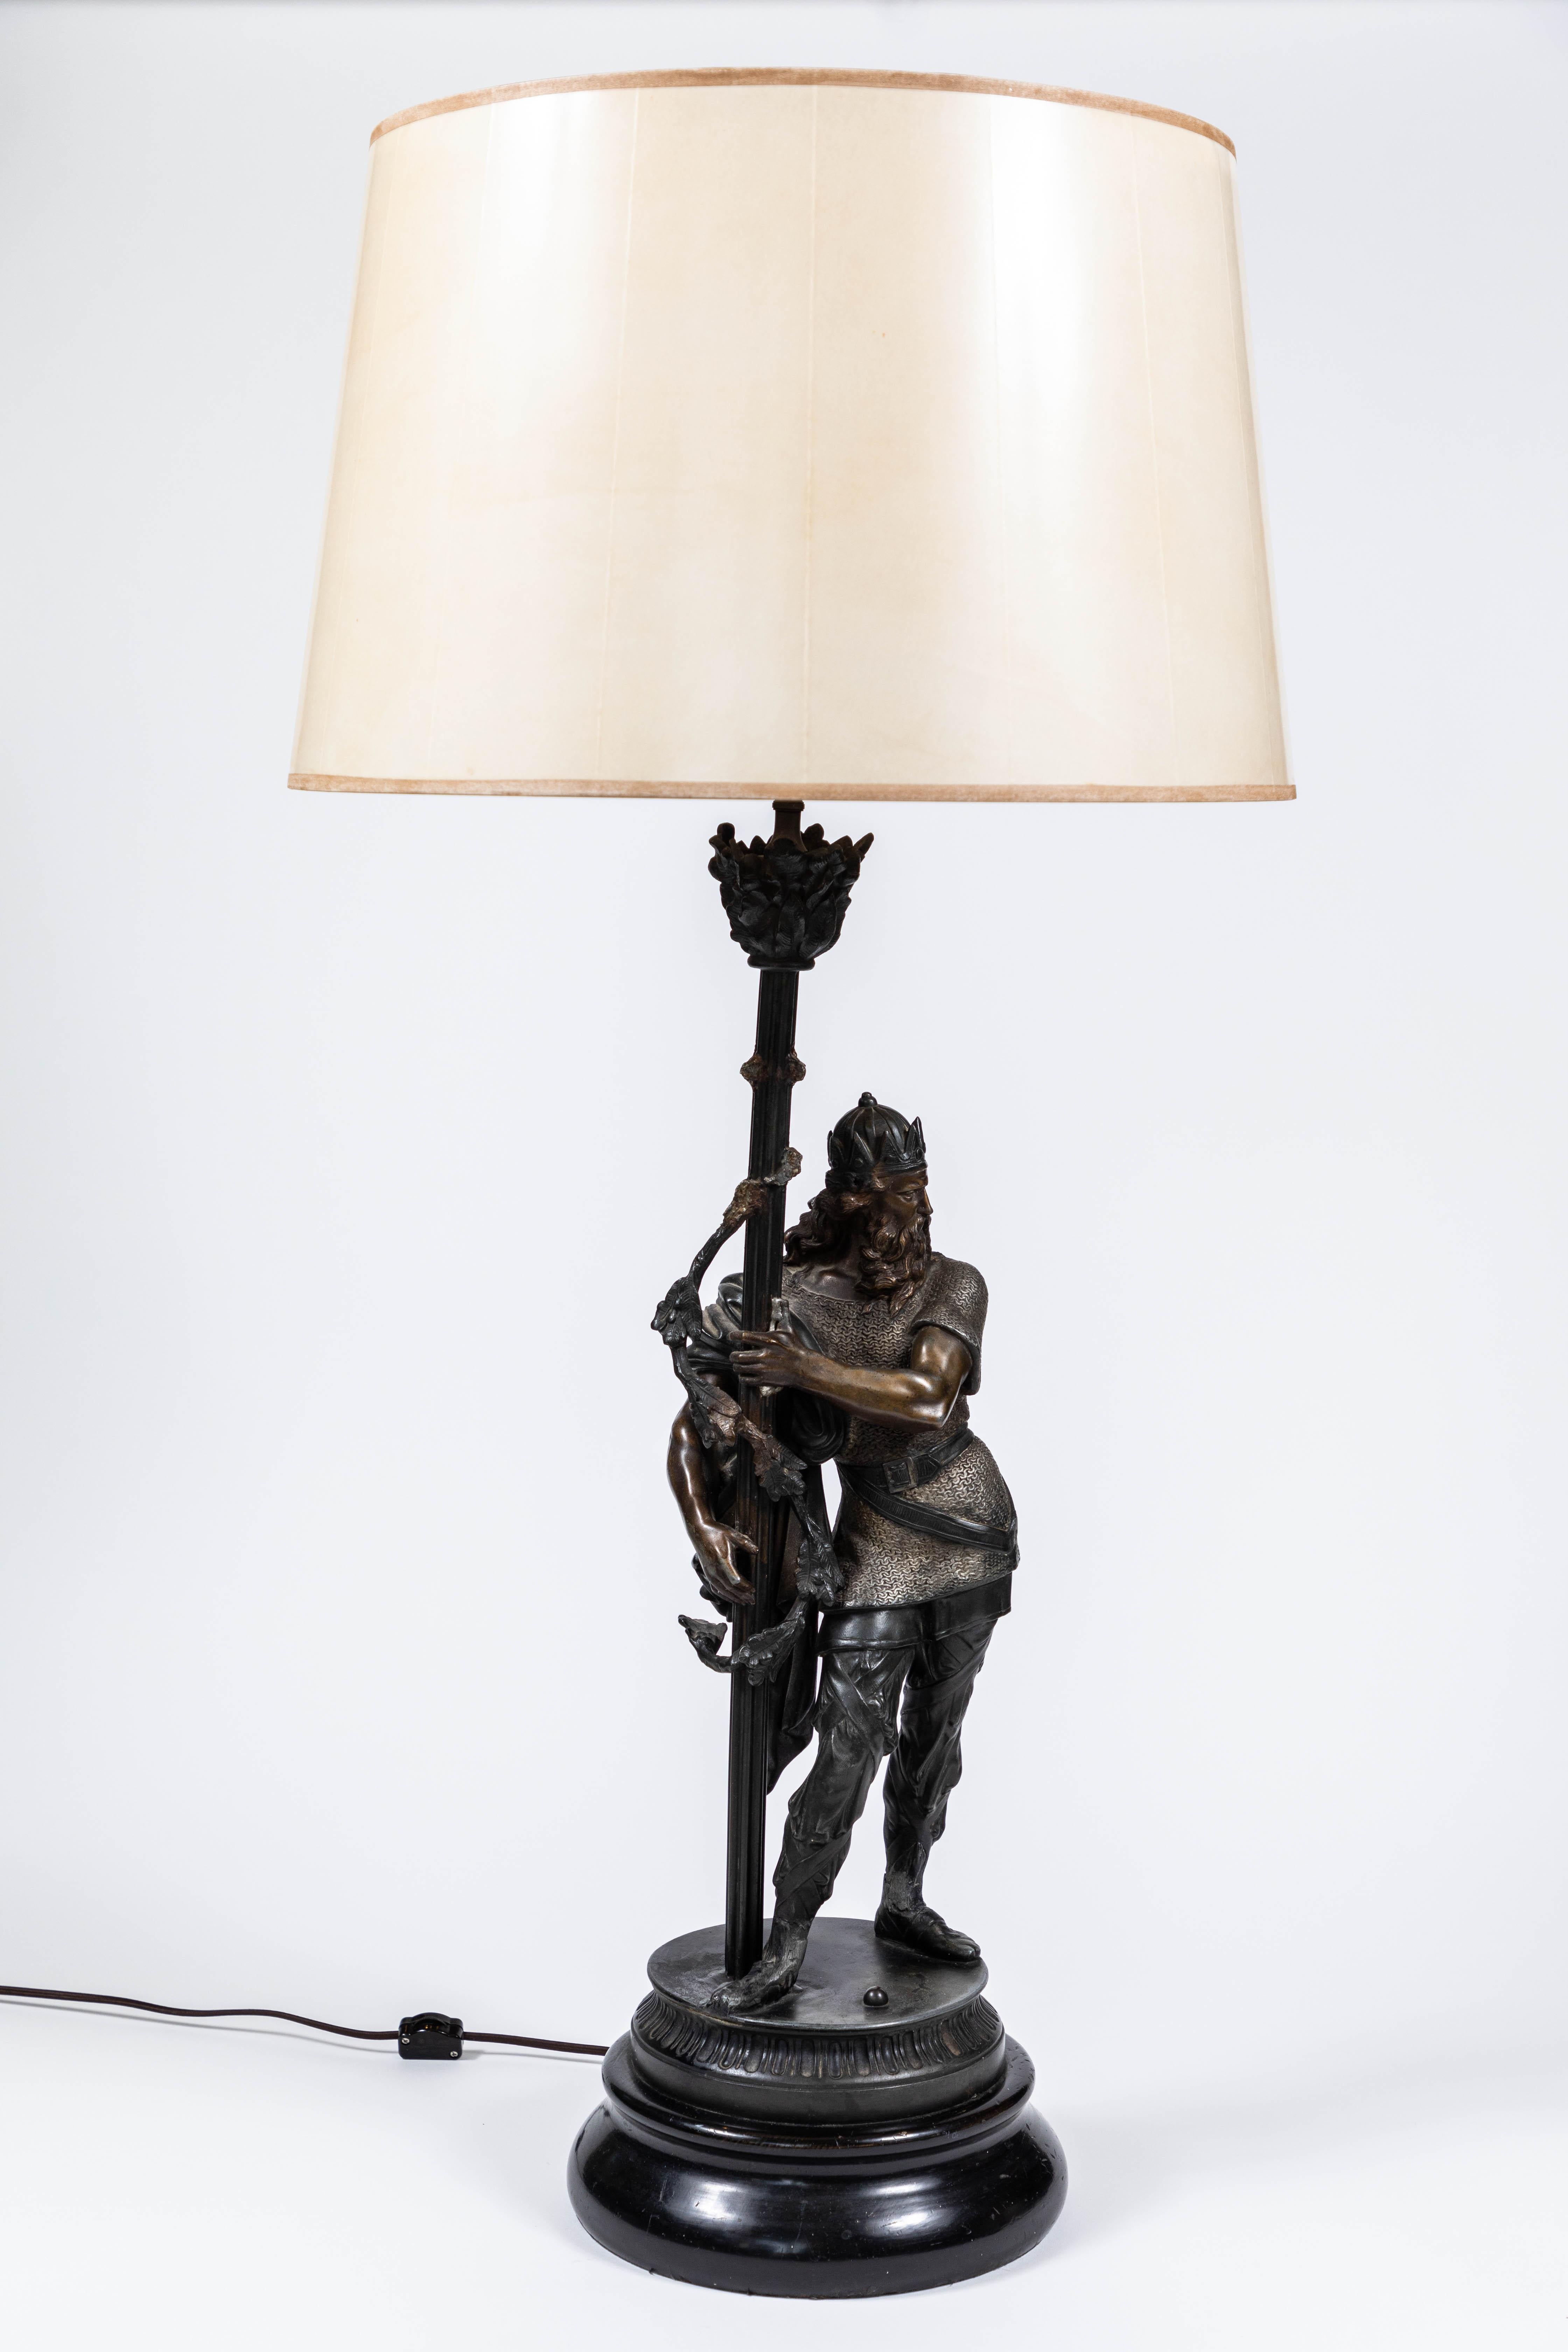 Vintage gladiator lamp and new custom parchment shade, newly rewired.

Measures: Shade: 16